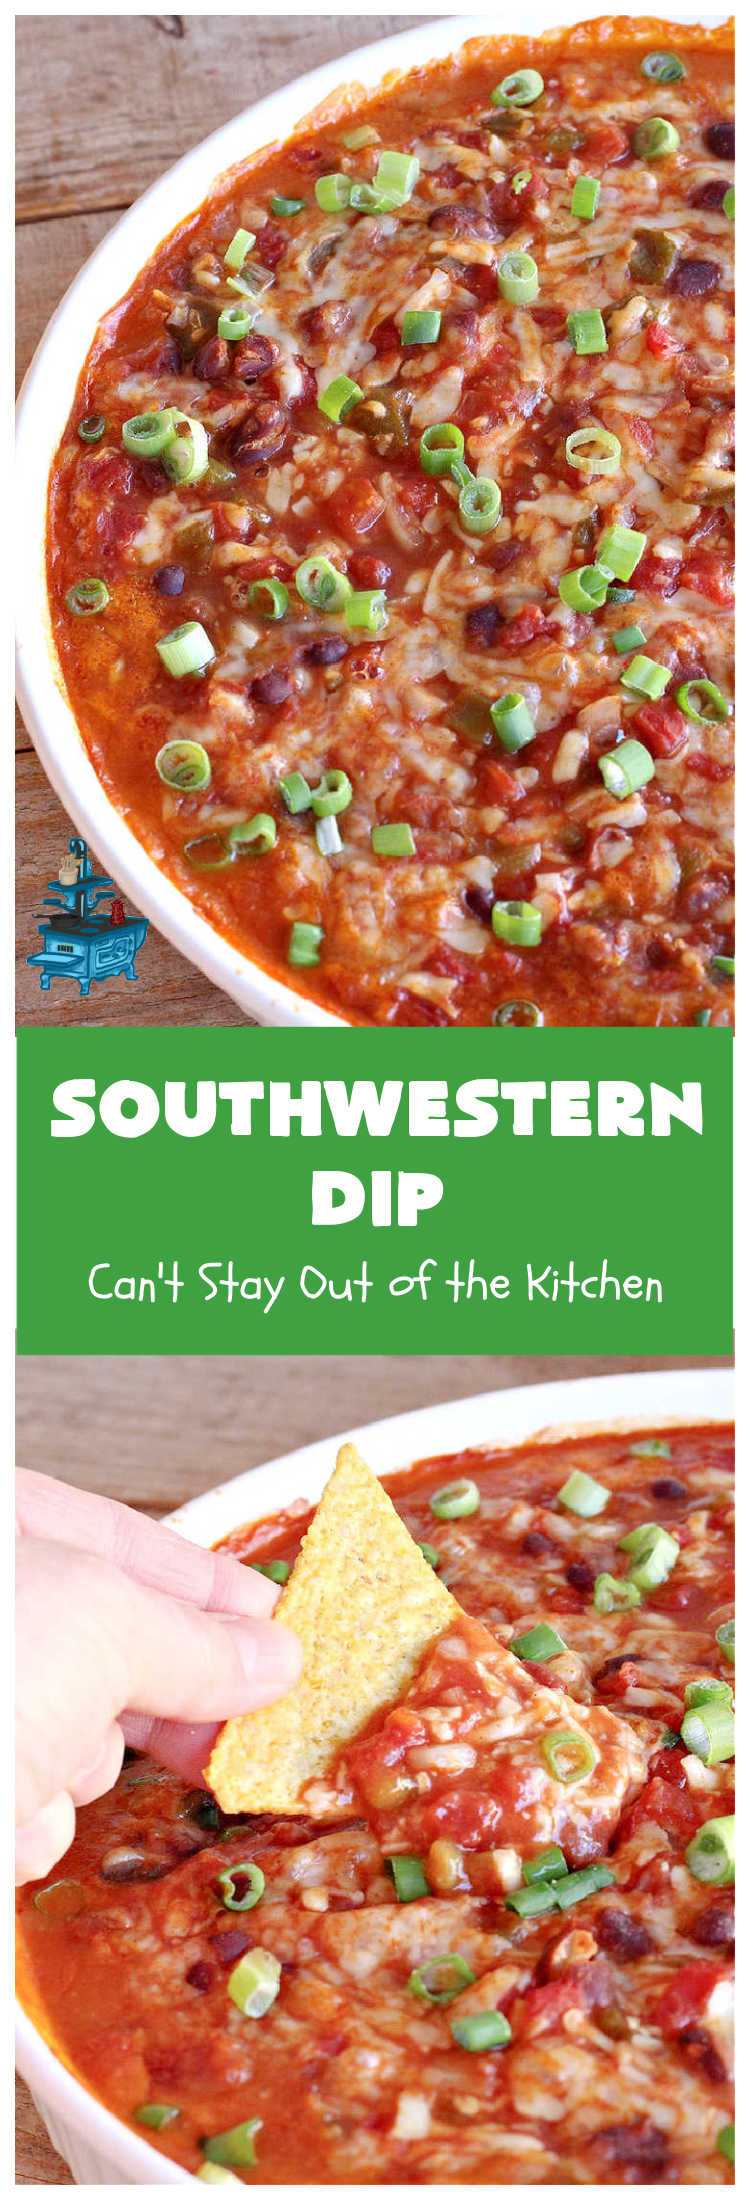 Southwestern Dip | Can't Stay Out of the Kitchen | this fantastic #TexMex #appetizer is quick & easy to make up. It's terrific to serve for #tailgating or office parties, potlucks or summer #holiday fun like #CincoDeMayo, #FourthOfJuly or #LaborDay. Serve with #Fritos or #TortillaChips. Every bite will knock your socks off! #GlutenFree #MontereyJackCheese #ChiliWithBeans #GreenChilies #TexMexDip #SouthwesternDip #TexMexAppetizer